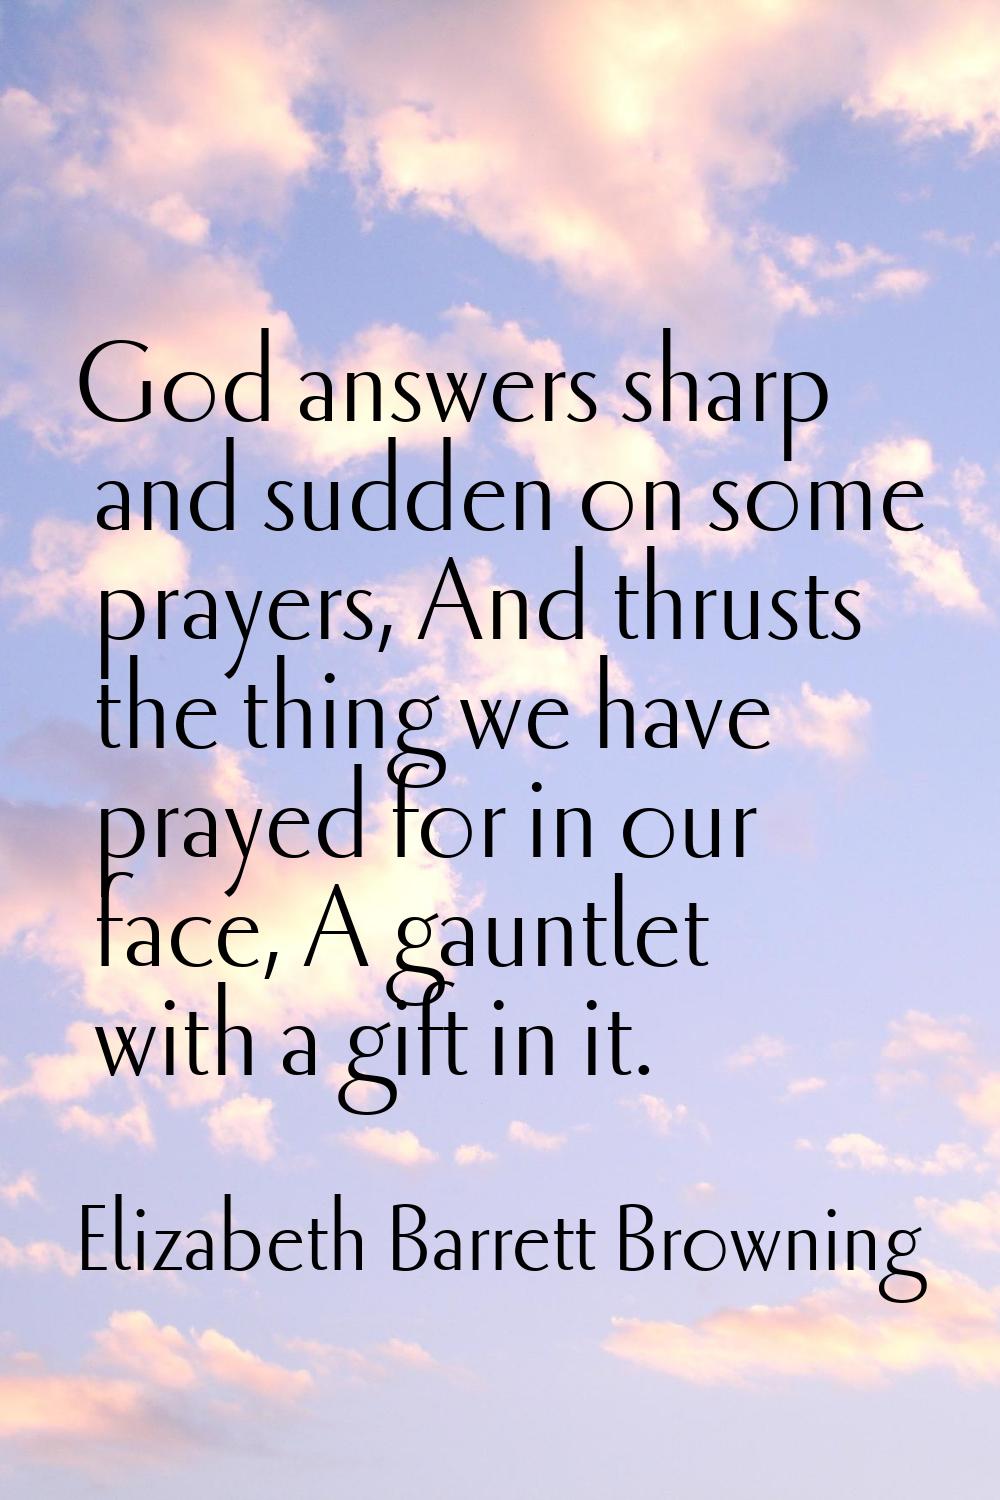 God answers sharp and sudden on some prayers, And thrusts the thing we have prayed for in our face,